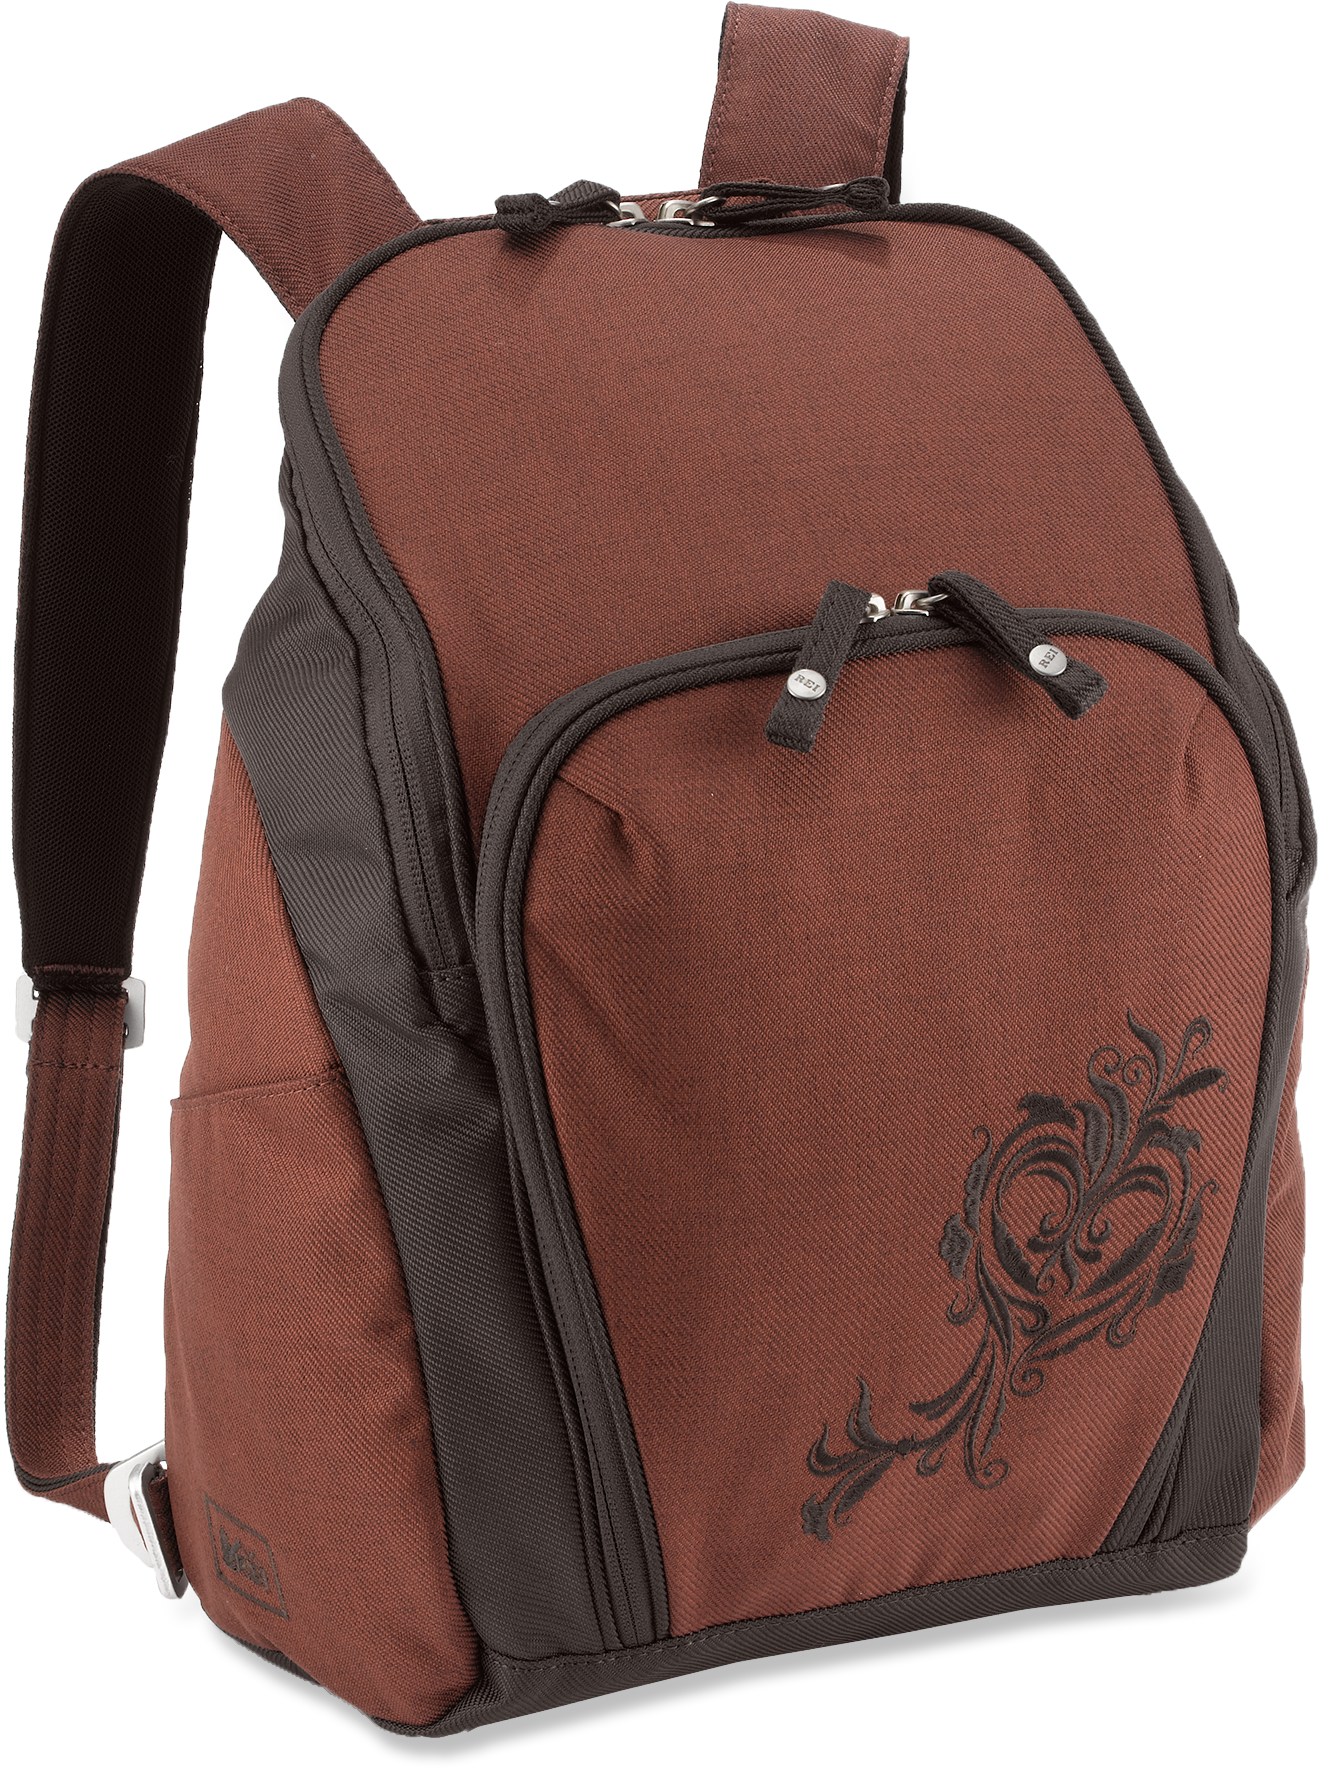 REI Nikole Day Bag Archives - Gazing In